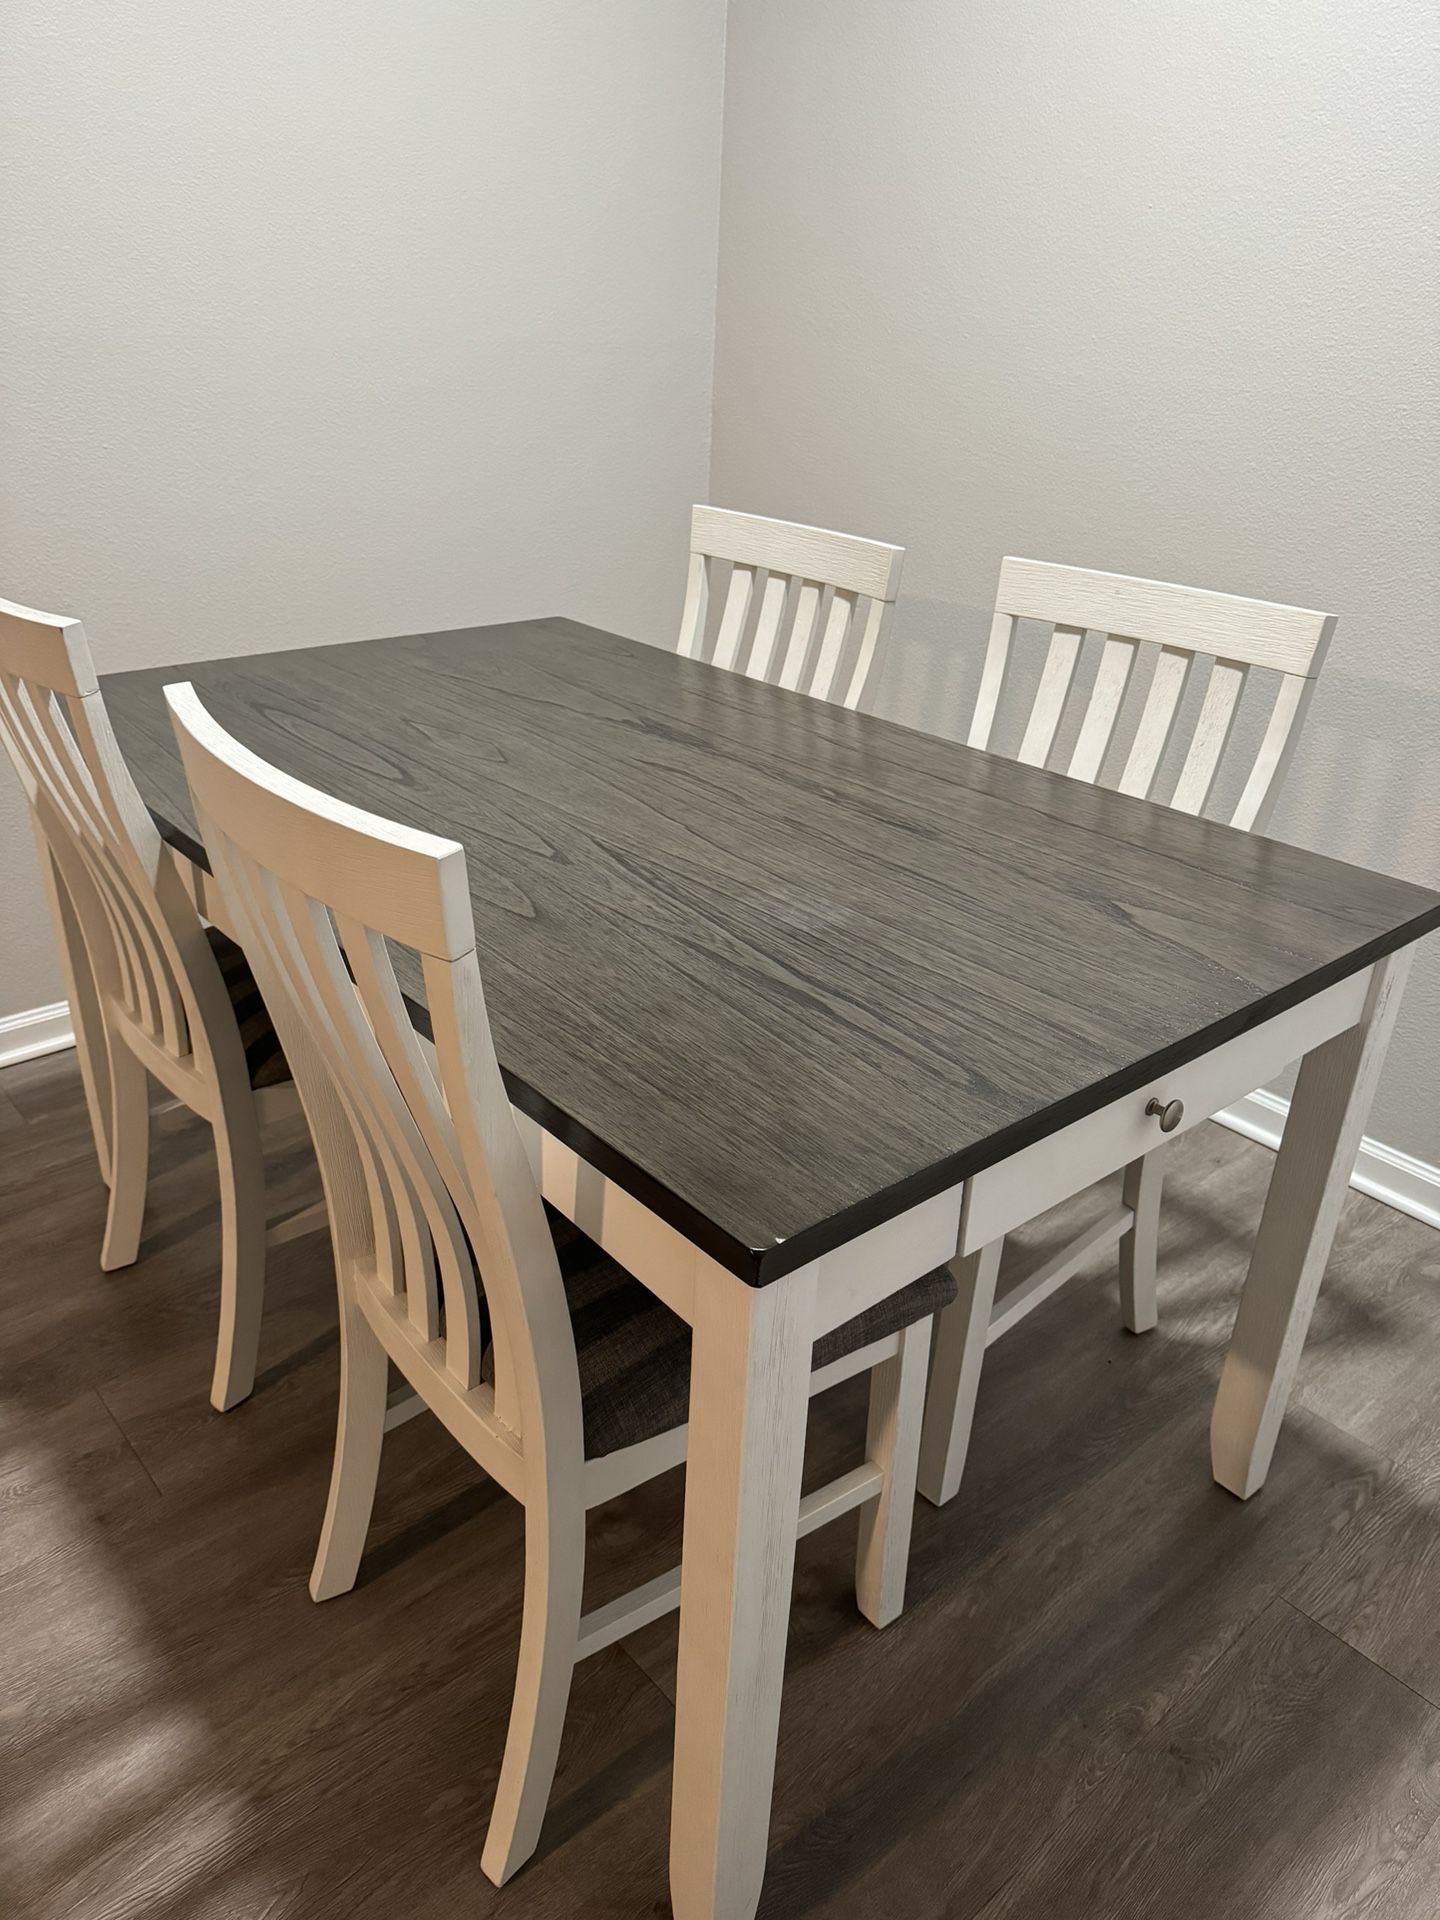 4 Person Dining Table Set